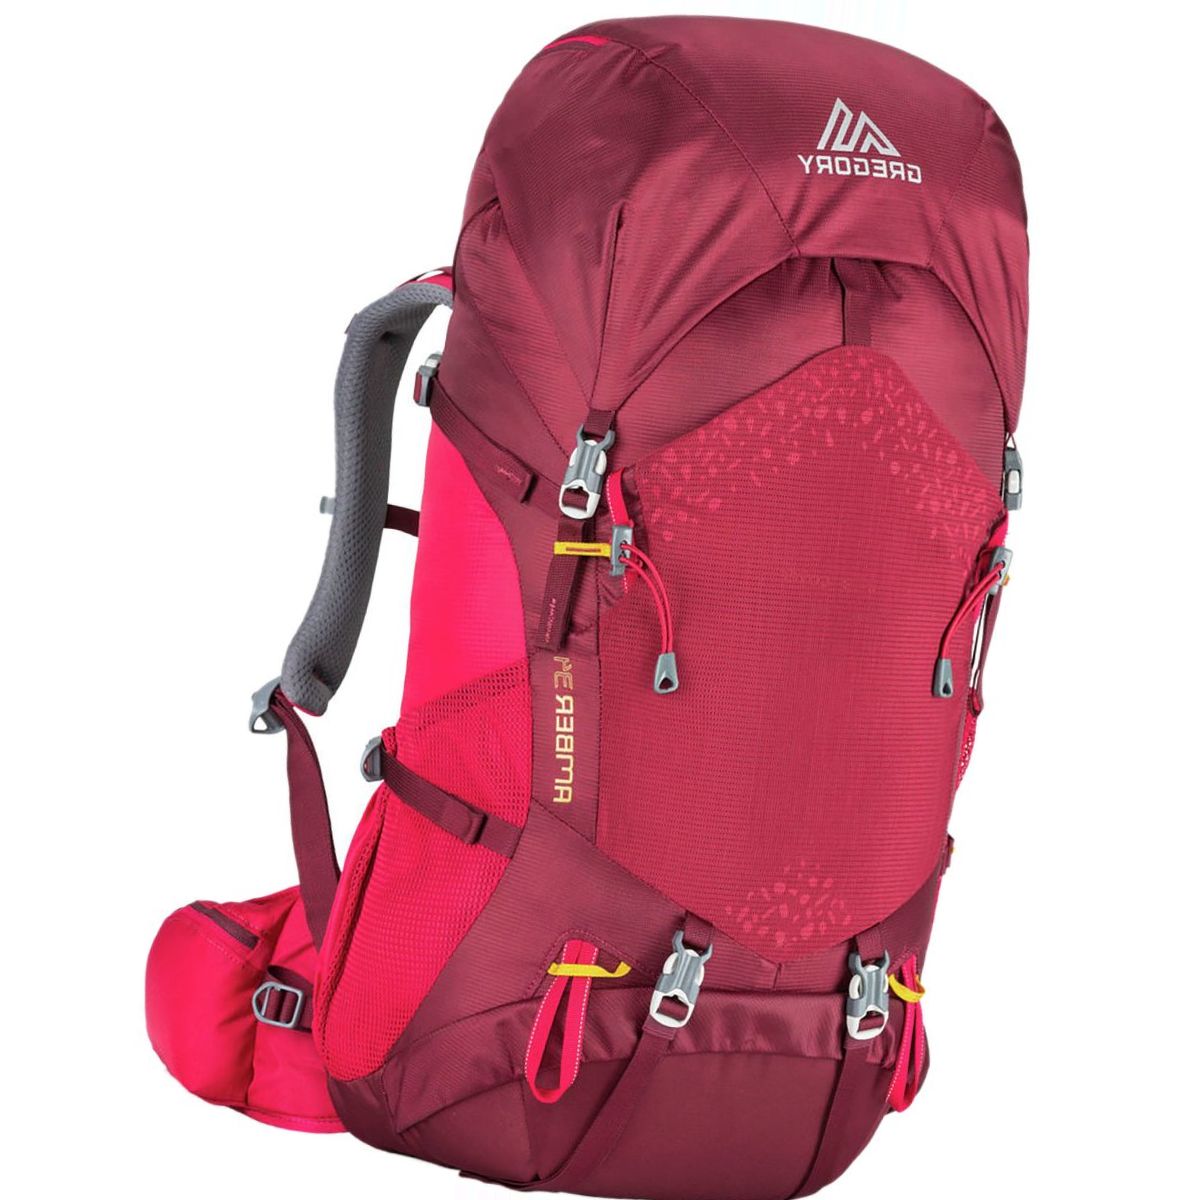 Gregory Amber 34L Backpack - Women's